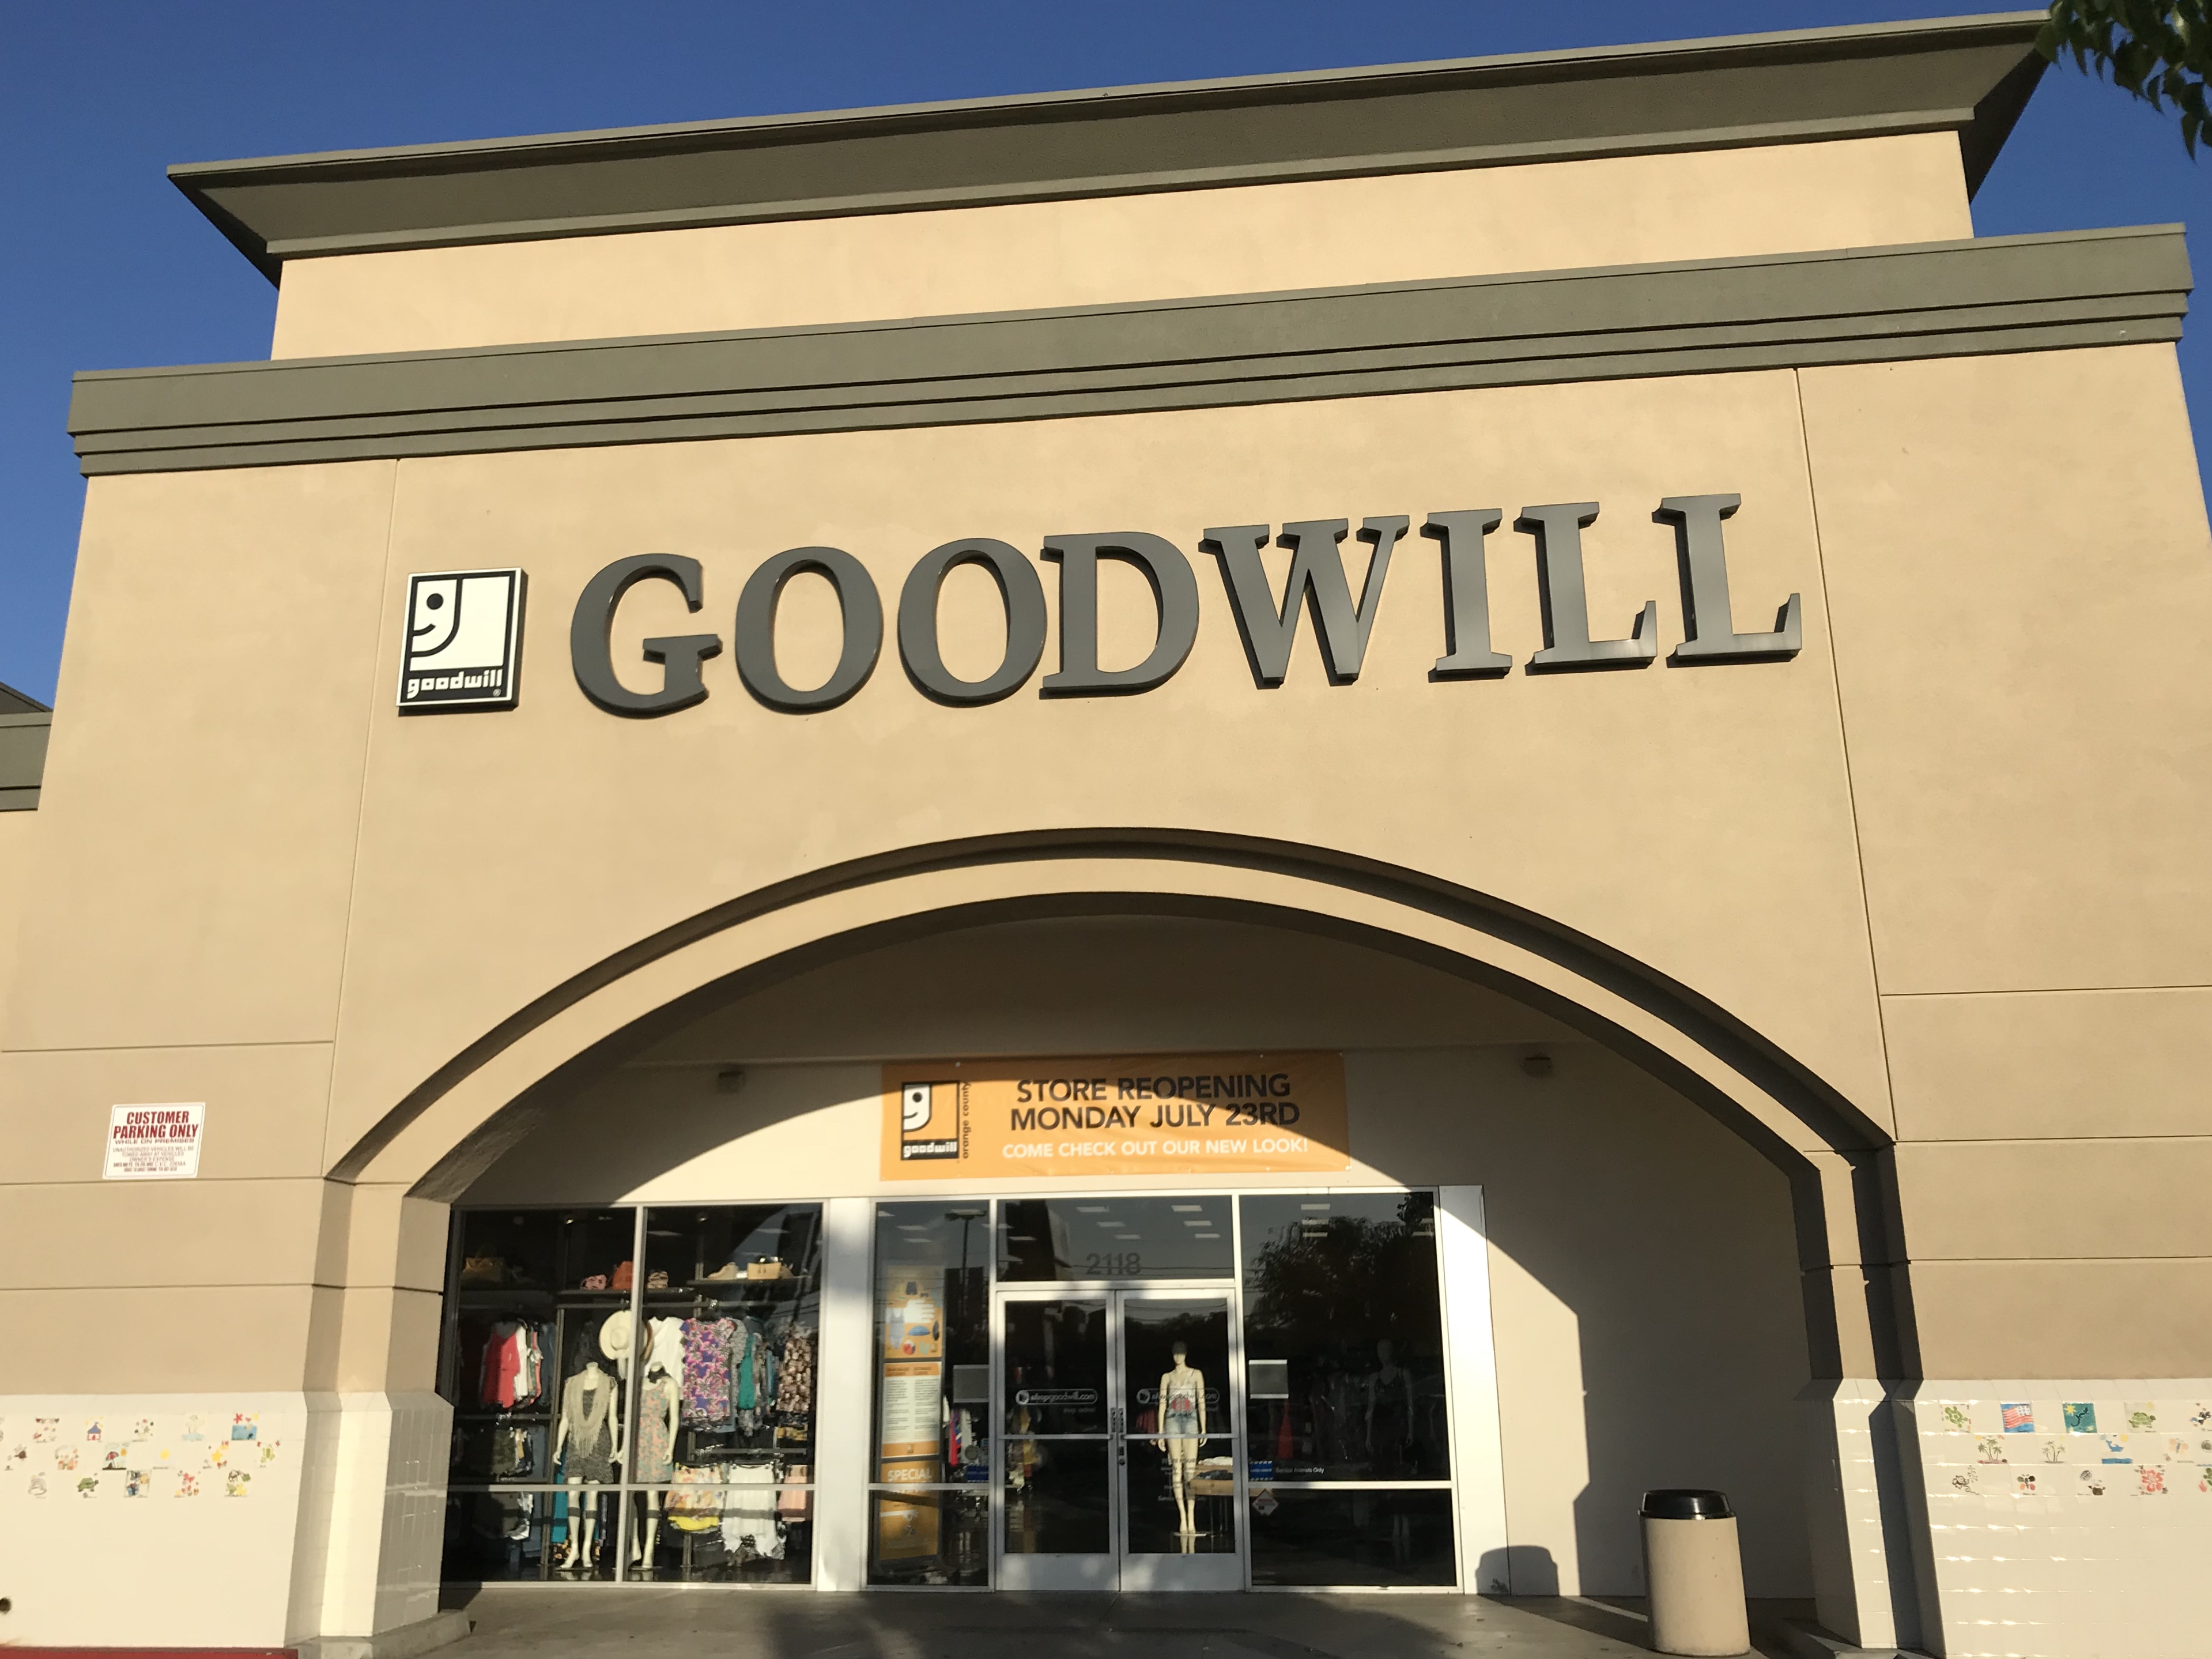 Goodwill storefront